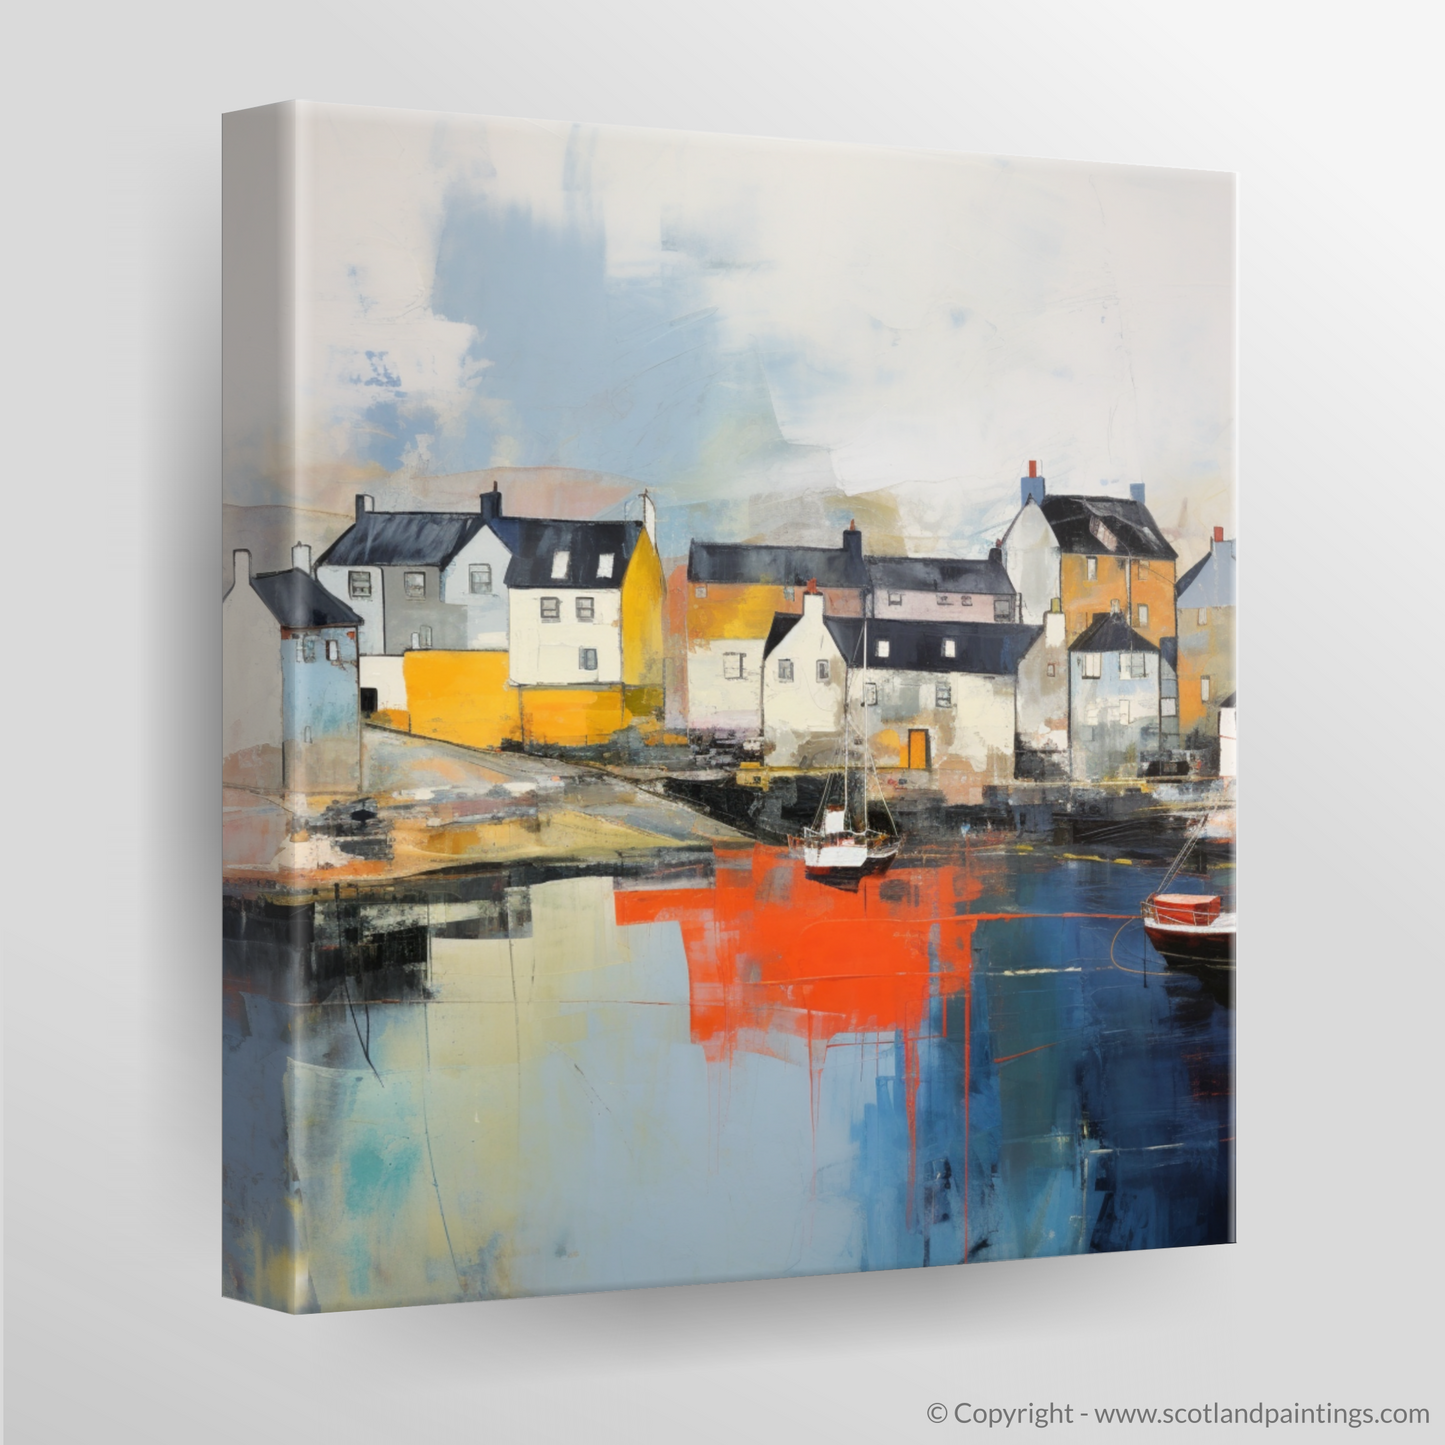 Storm over North Berwick Harbour: An Abstract Tapestry of Scottish Coastline